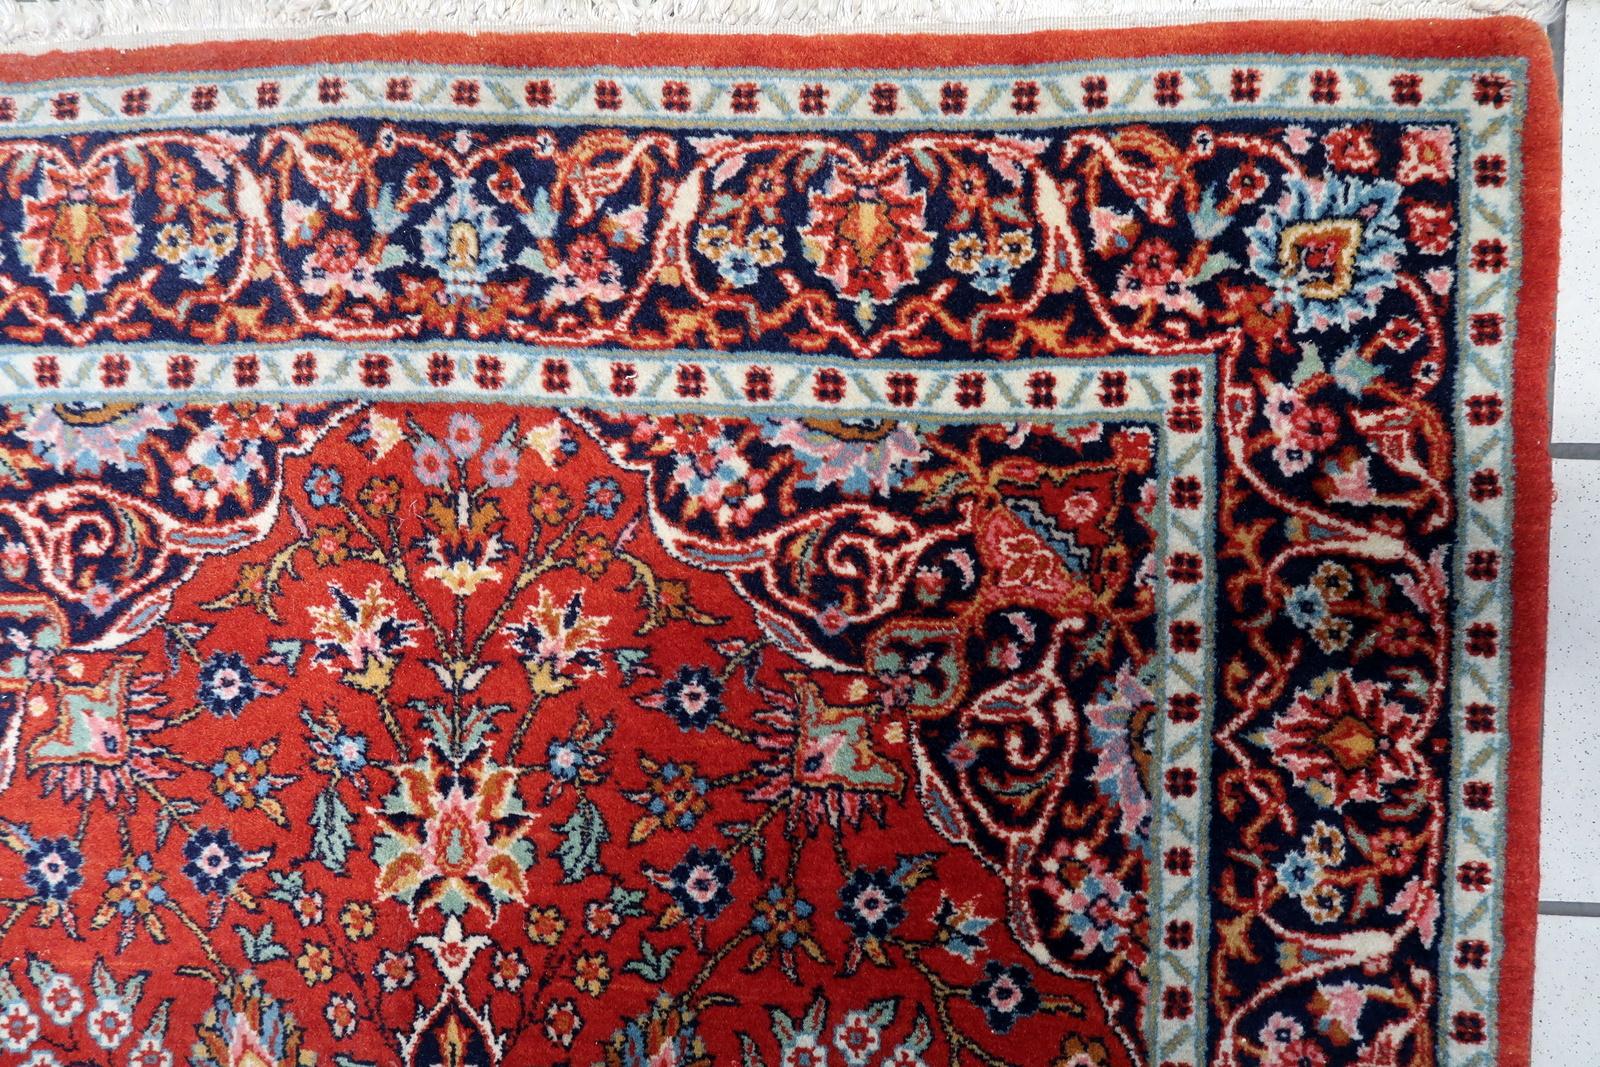 Introducing our remarkable Handmade Antique Persian Kashan Rug from the 1930s. This exquisite rug showcases a vibrant and busy design with a captivating floral motif, set against a backdrop of rich red, navy blue, turquoise, pink, and beige colors.